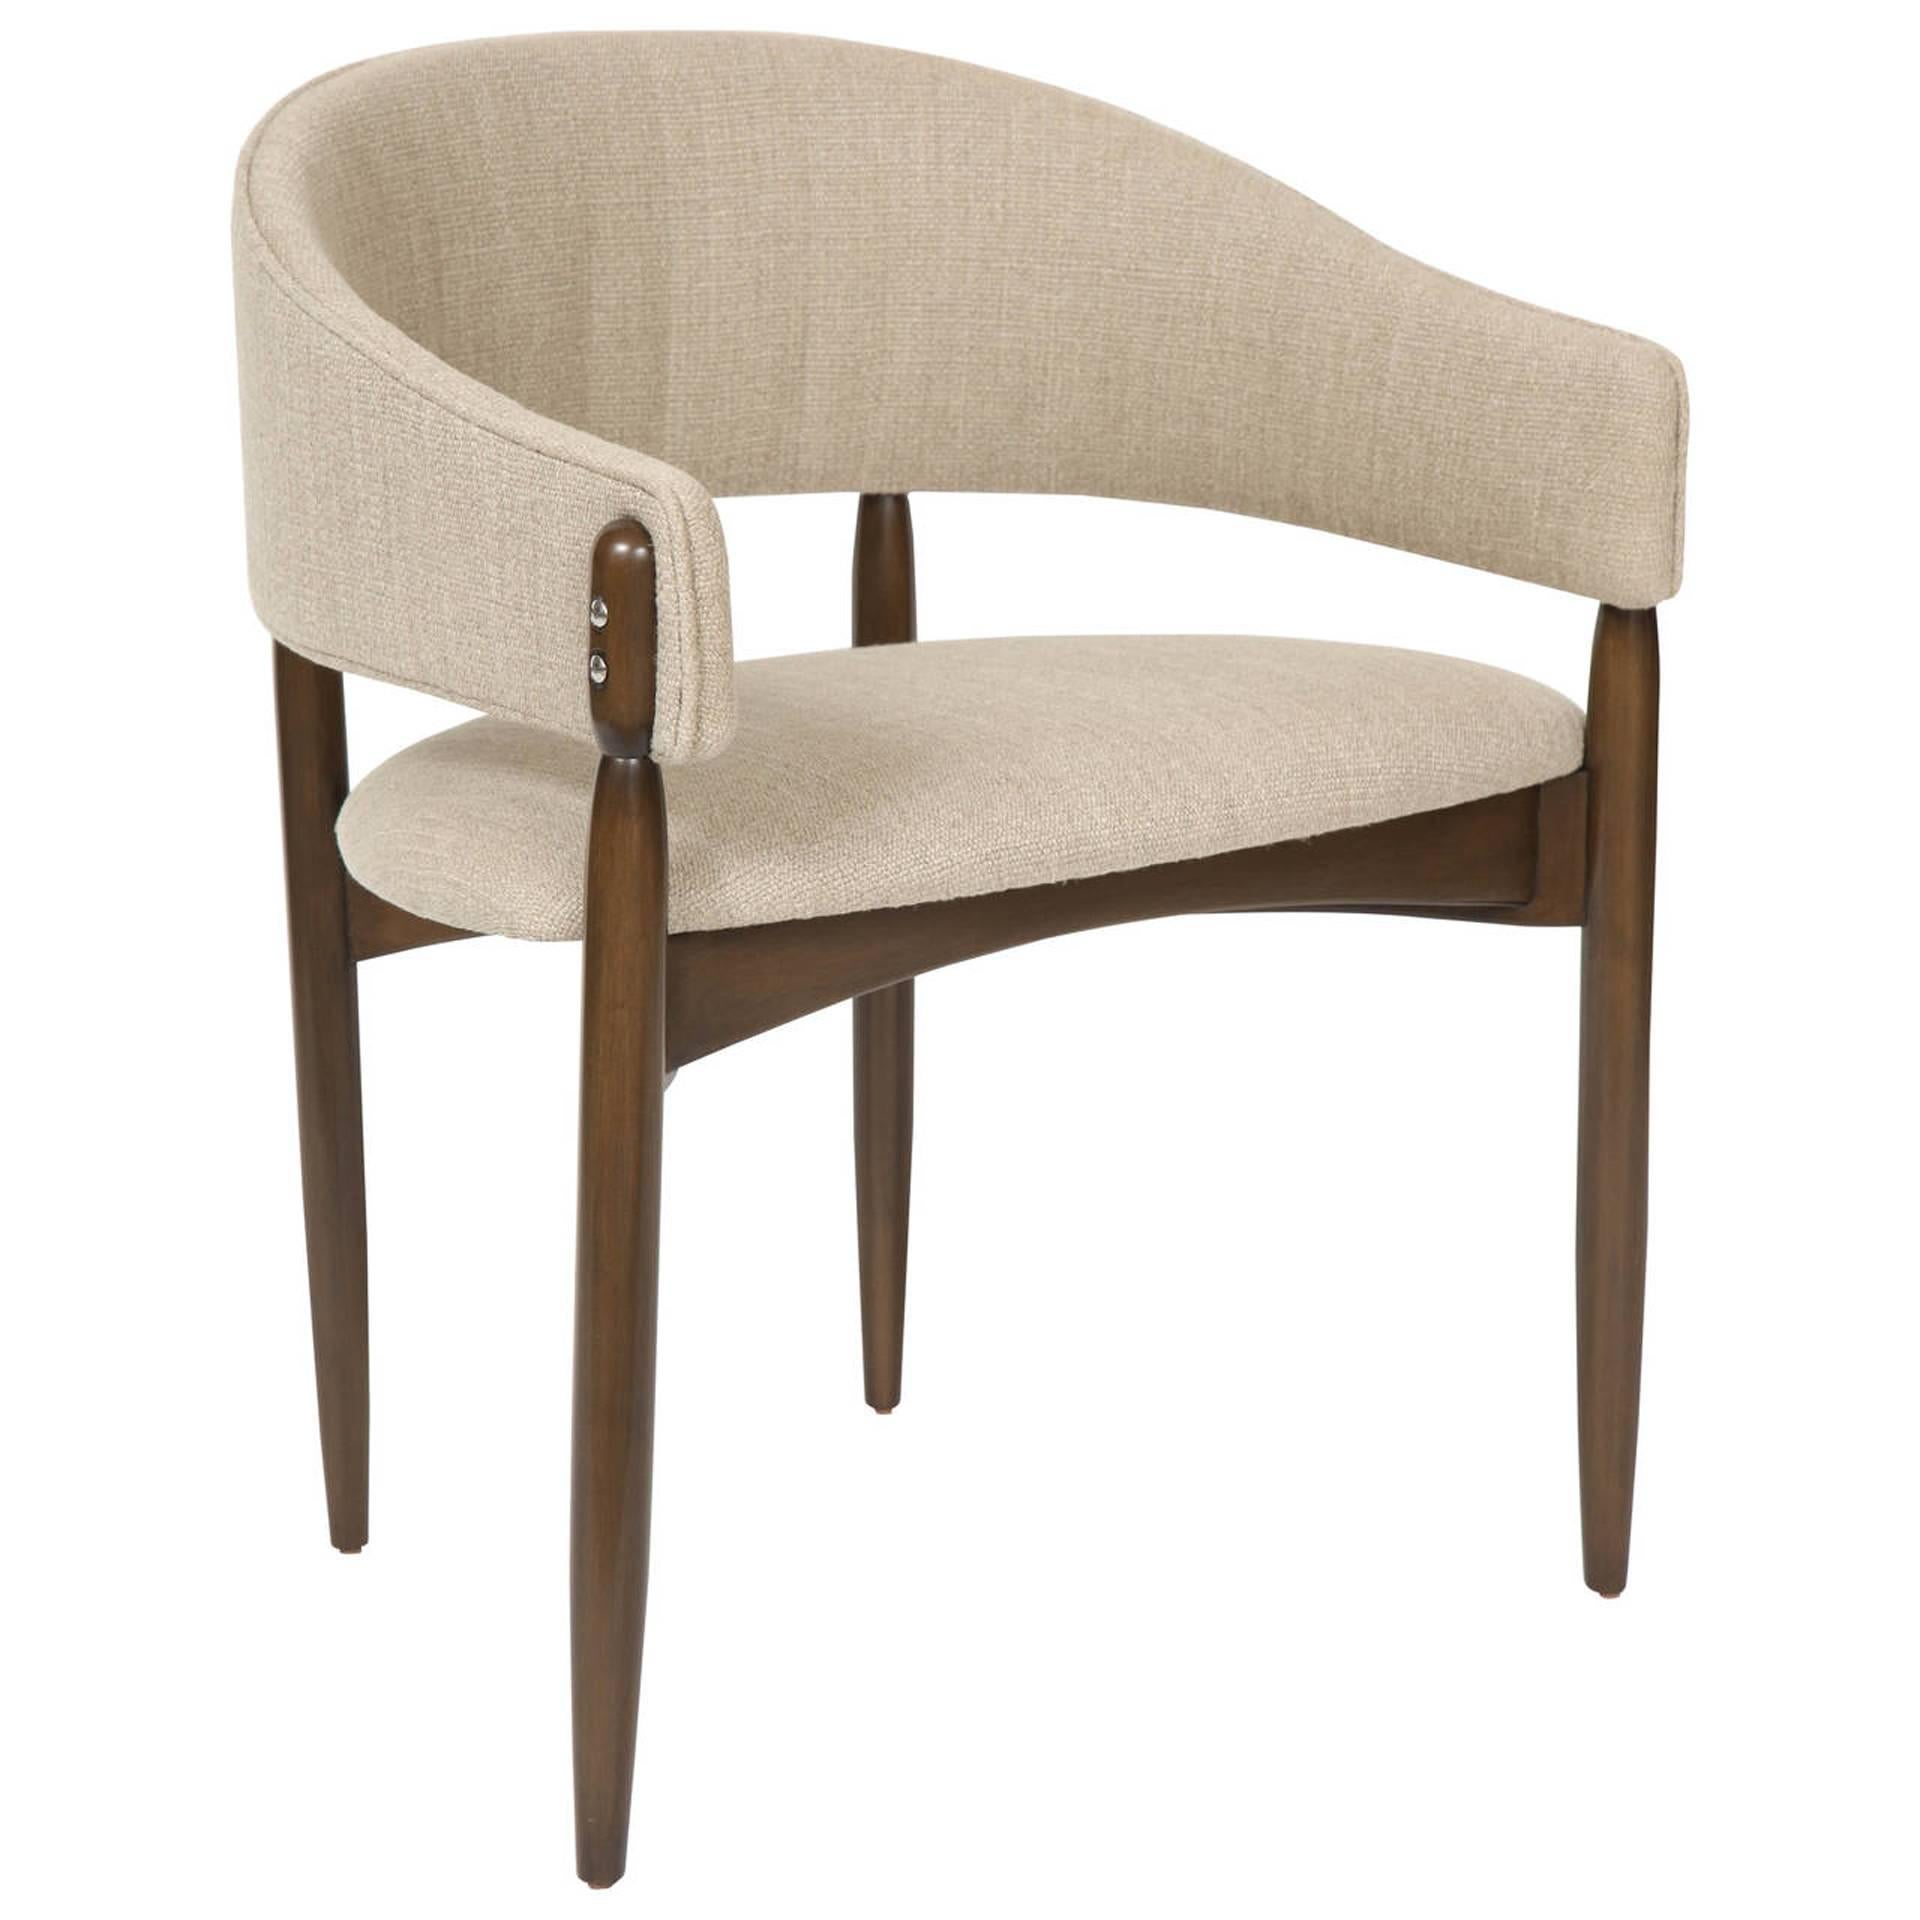 Enroth dining chair.
Measures: Seat height-18”. 
Seat depth -18.5”. 
COM requirements: 2yards. 
5% up-charge for contrasting fabrics and or welting. 
COL requirements: 40 sq. feet. 
5% percentage up-charge for all COL or exotic materials.